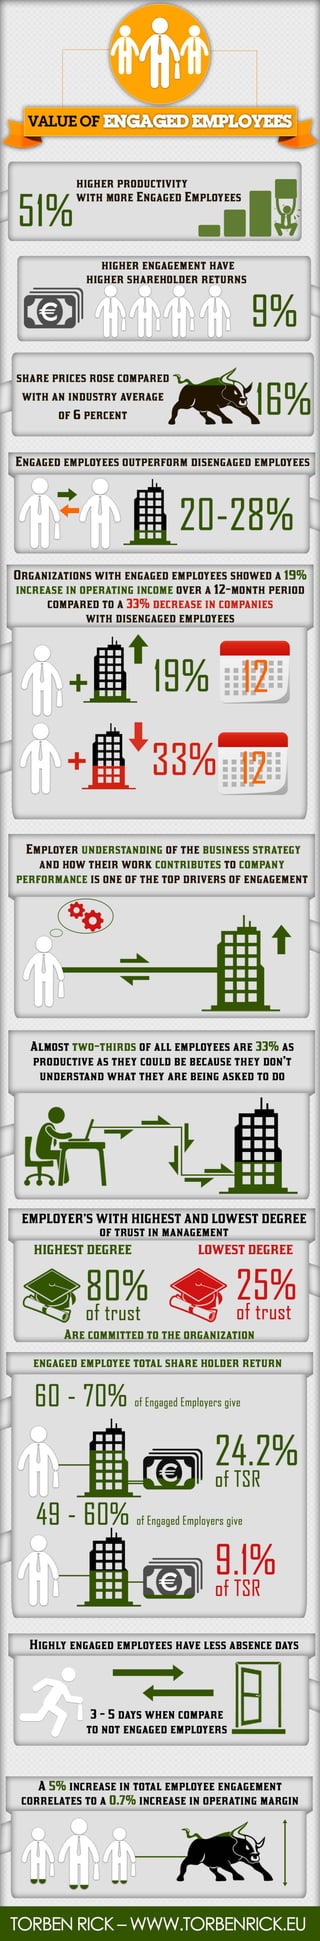 Infographic: The value of engaged employees